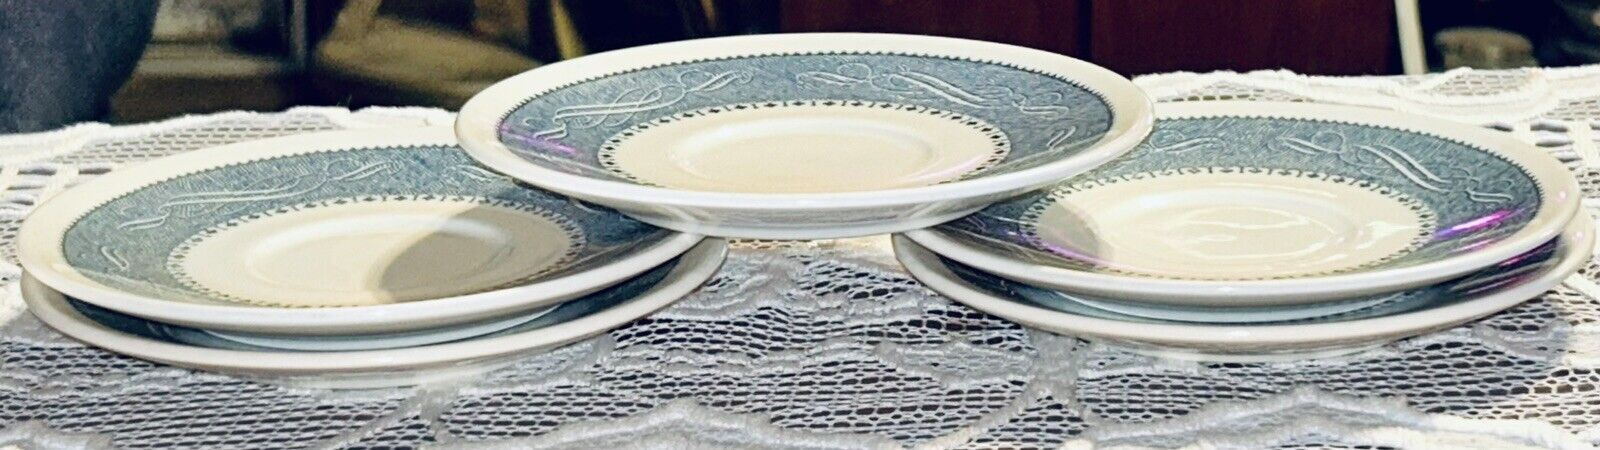 5 Vintage Royal Currier & Ives Style Saucers Blue and White Ceramic